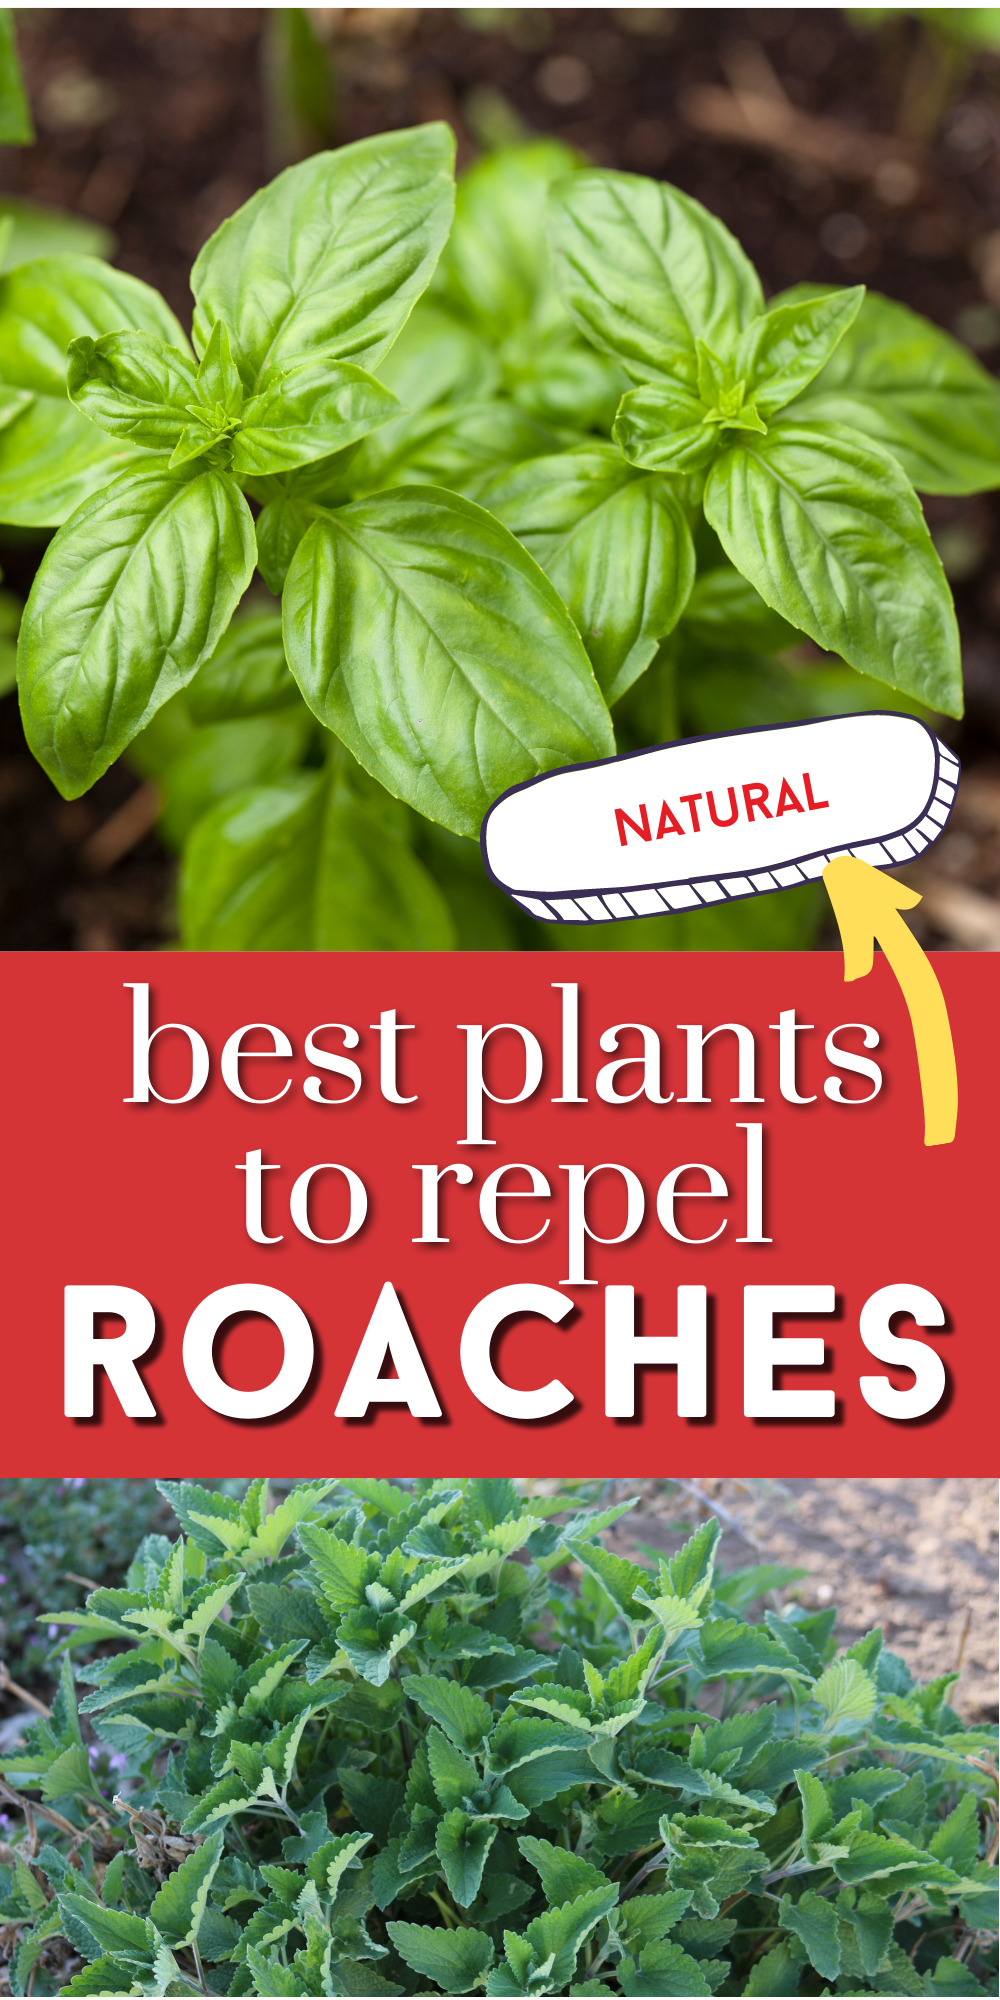 Plants that repel cockroaches in the garden